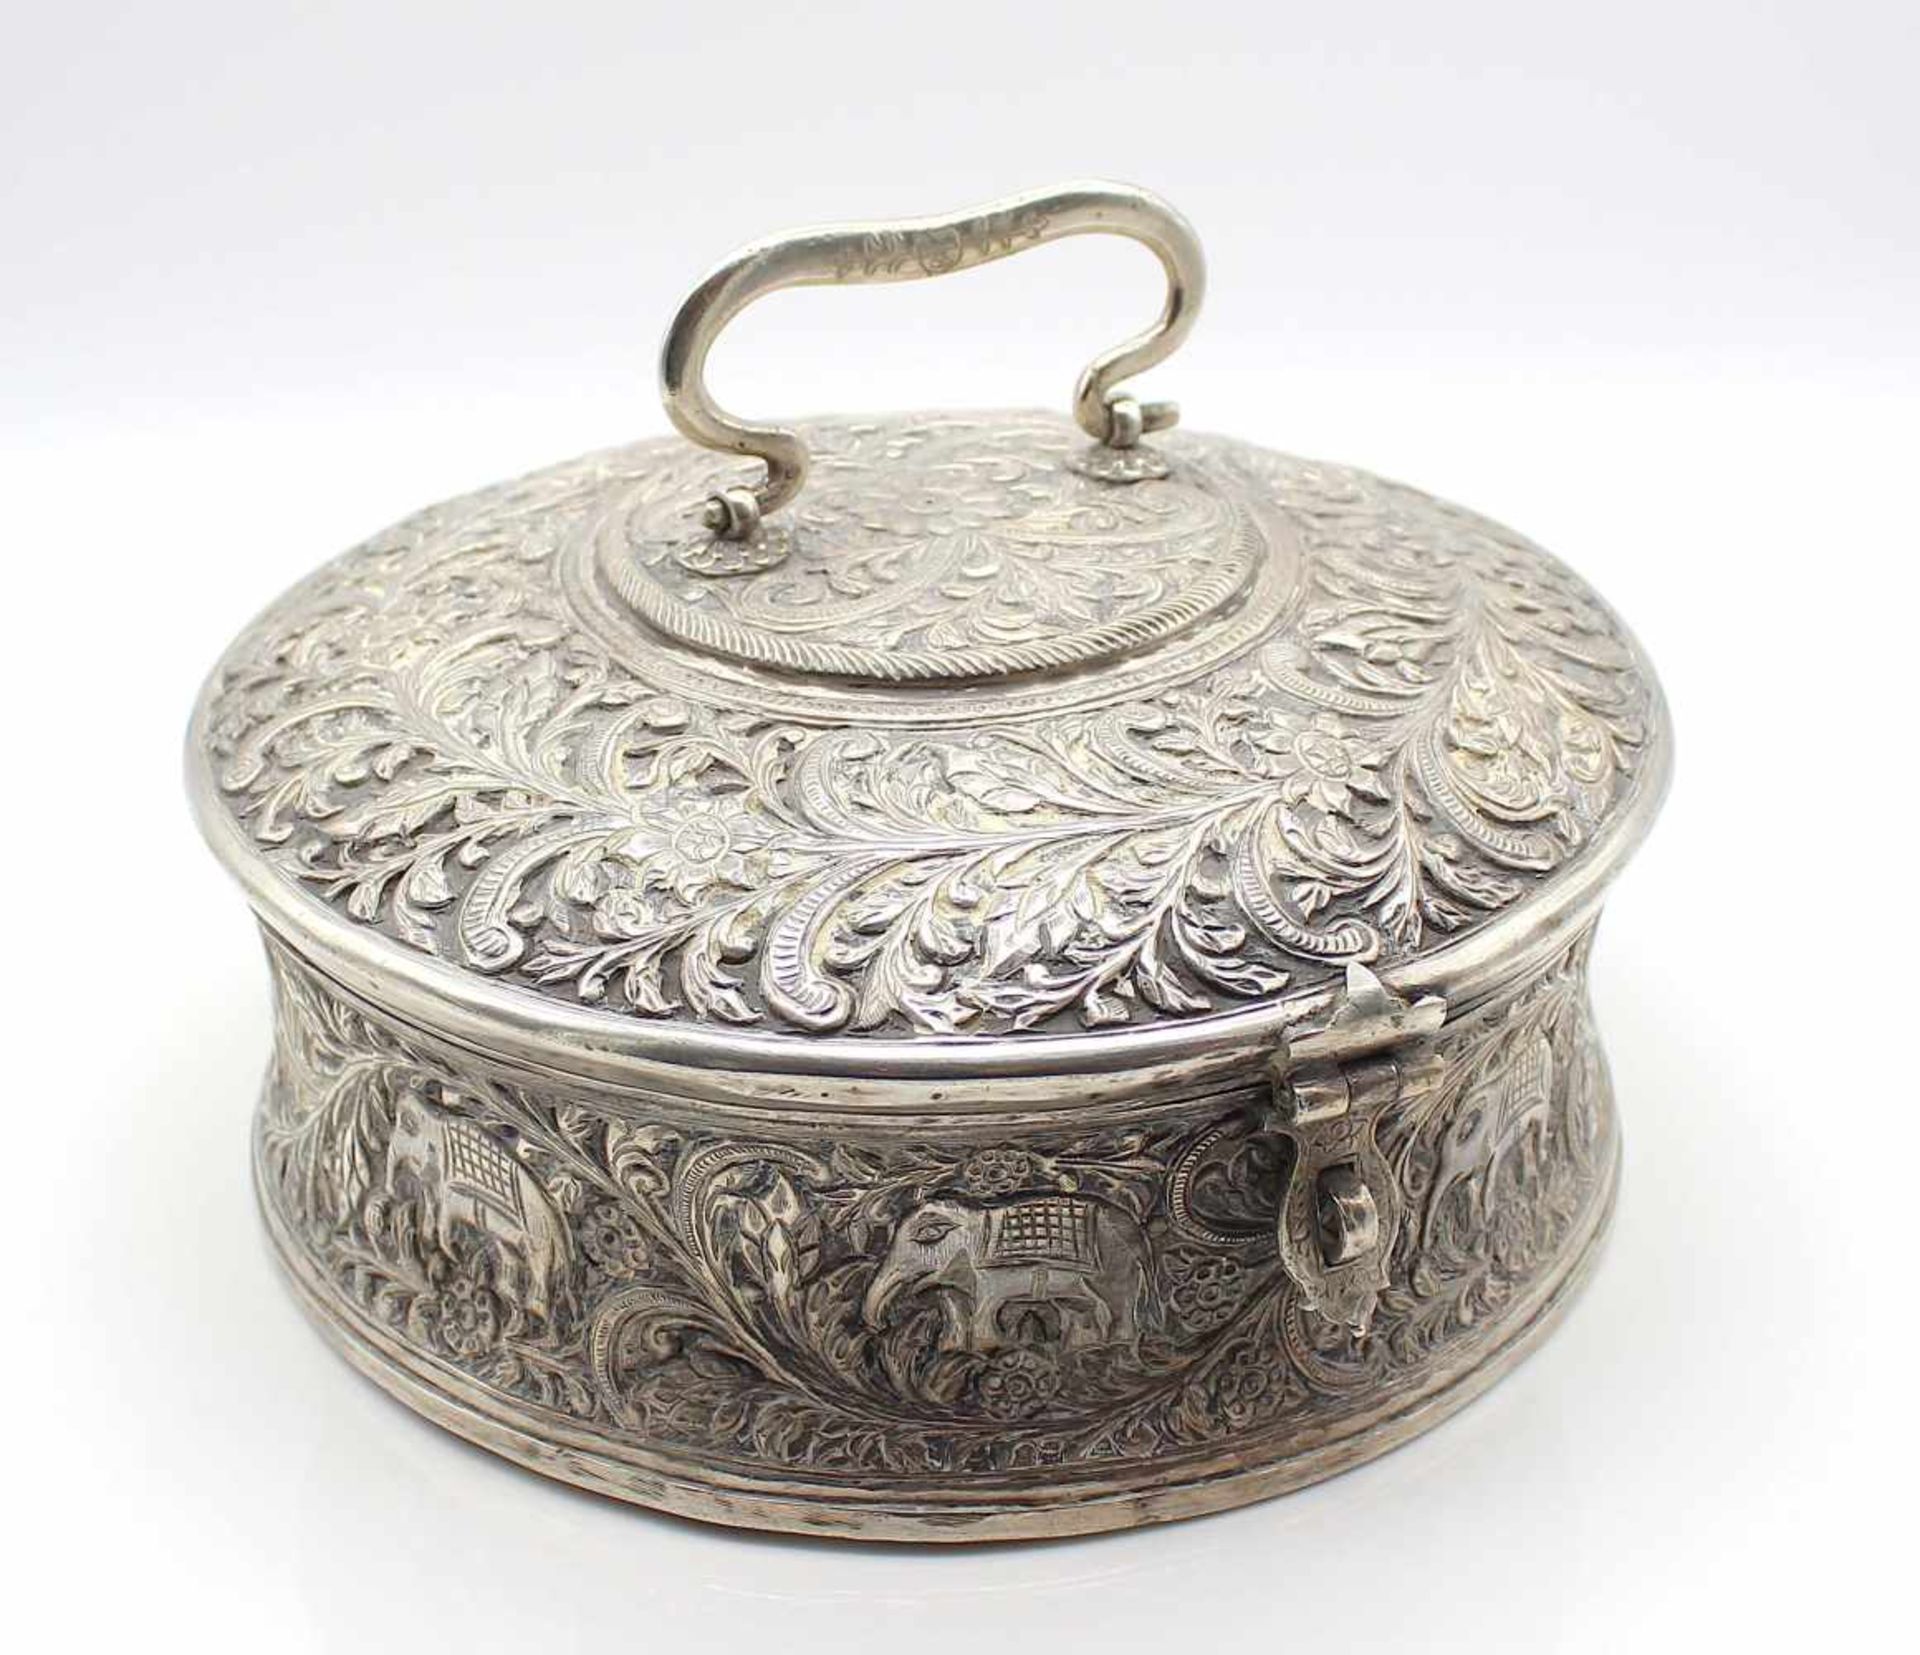 Lid box with elephant motif and relief work, probably Asia. Tested for silver. Partly heavily